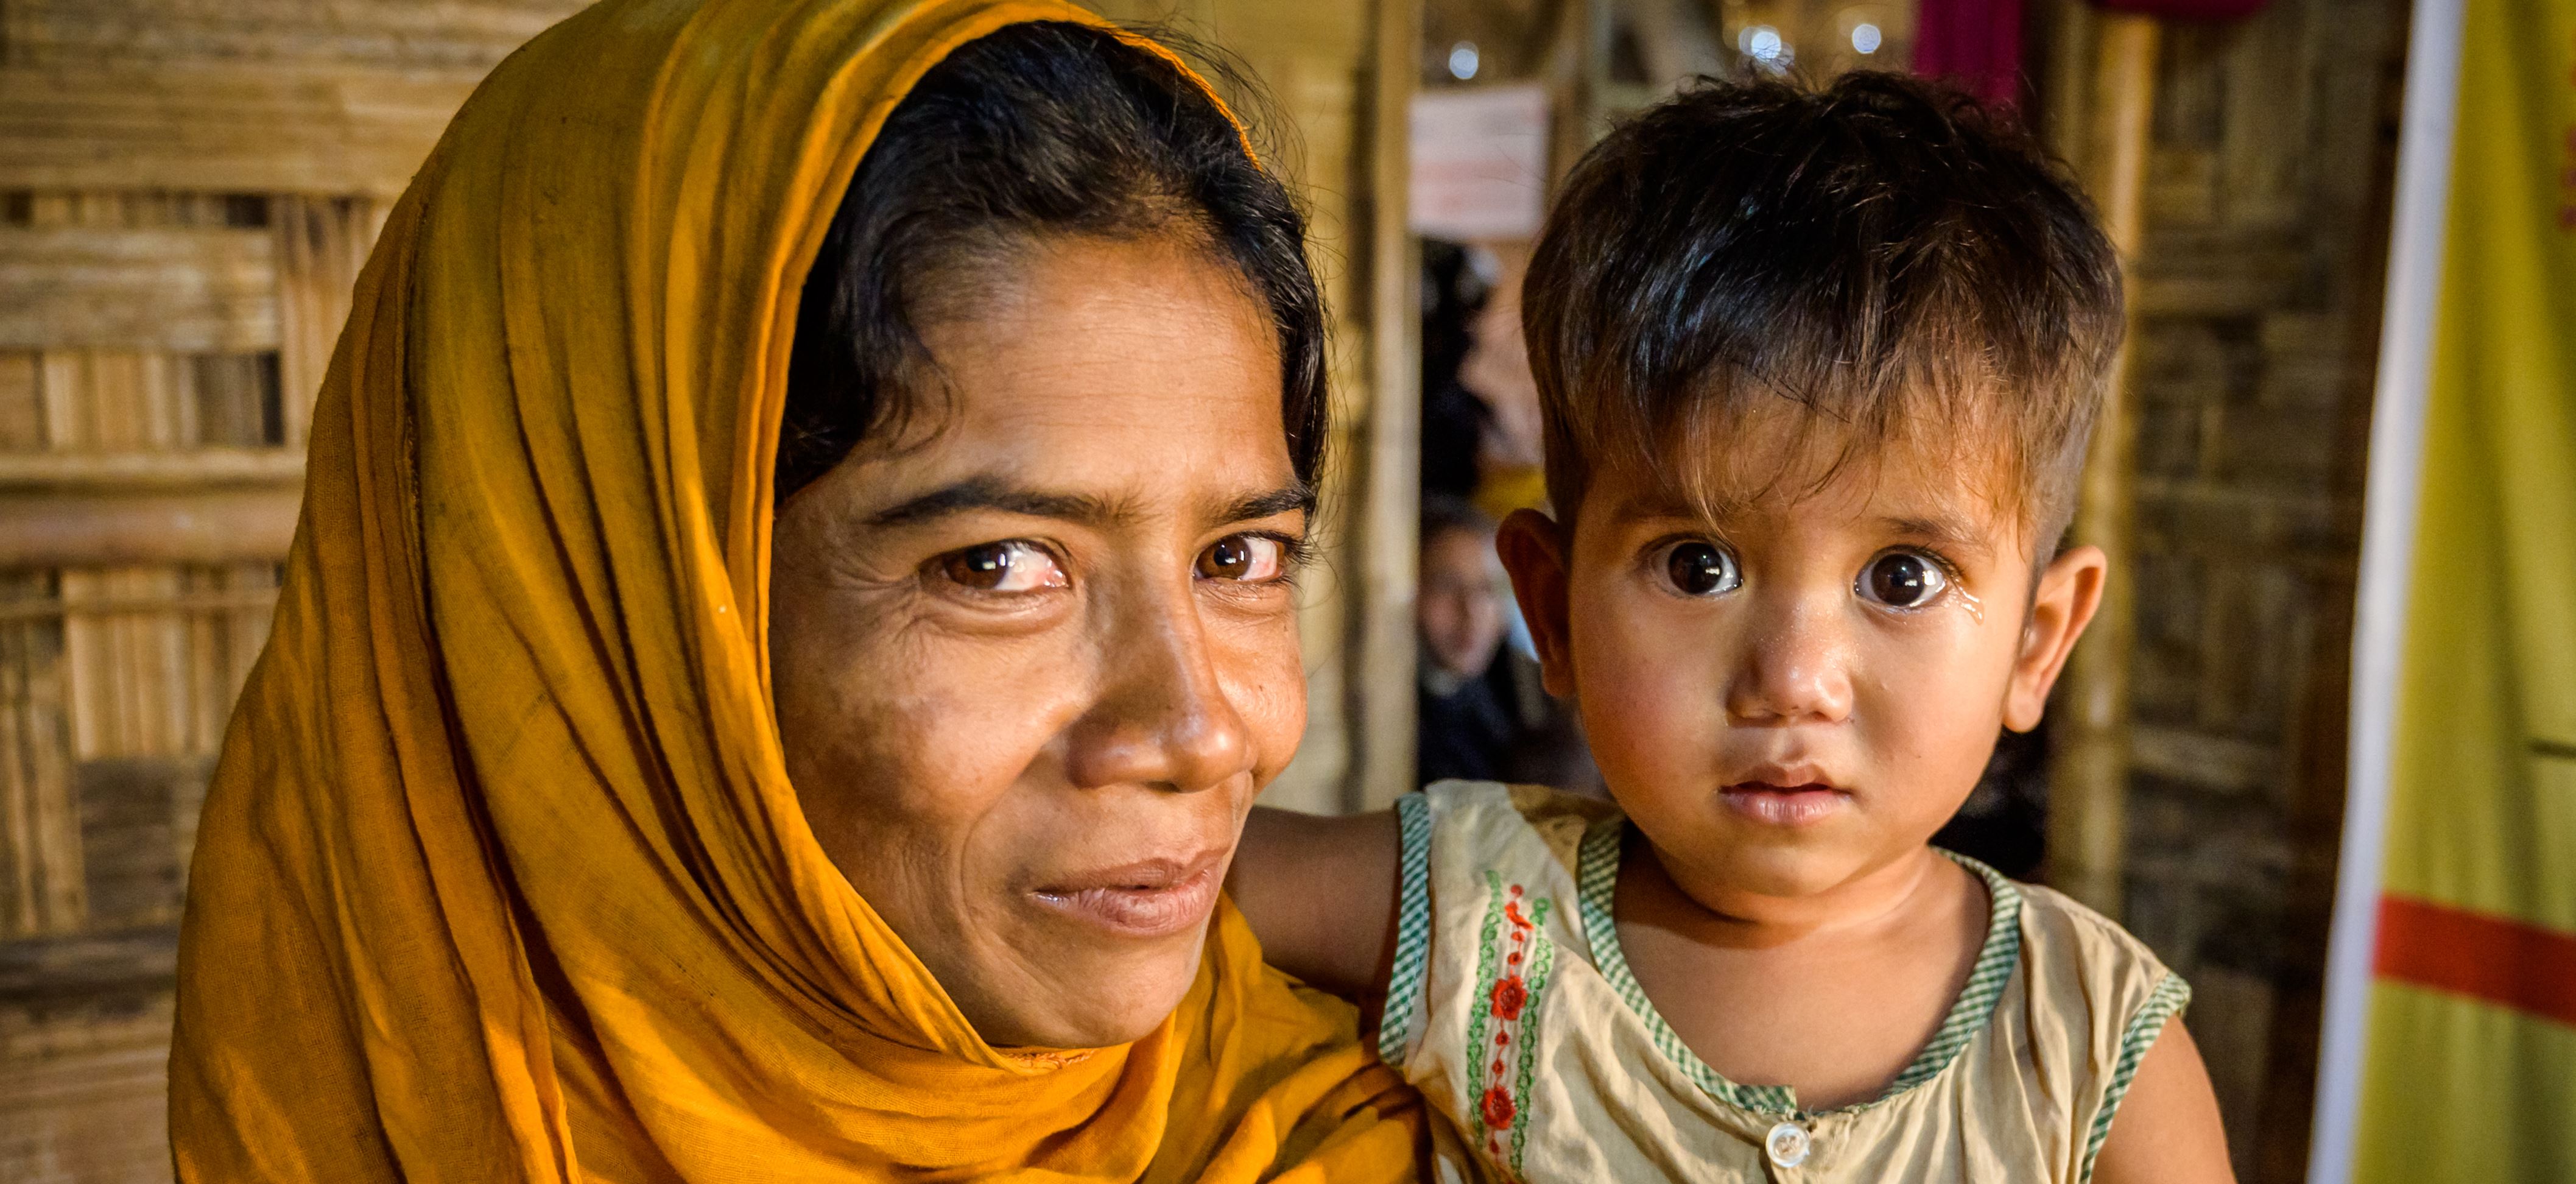 Mother and her child, Rohingya refugees, who fled to Bangladesh, look into the camera, happier now the child has recovered from malnutrition